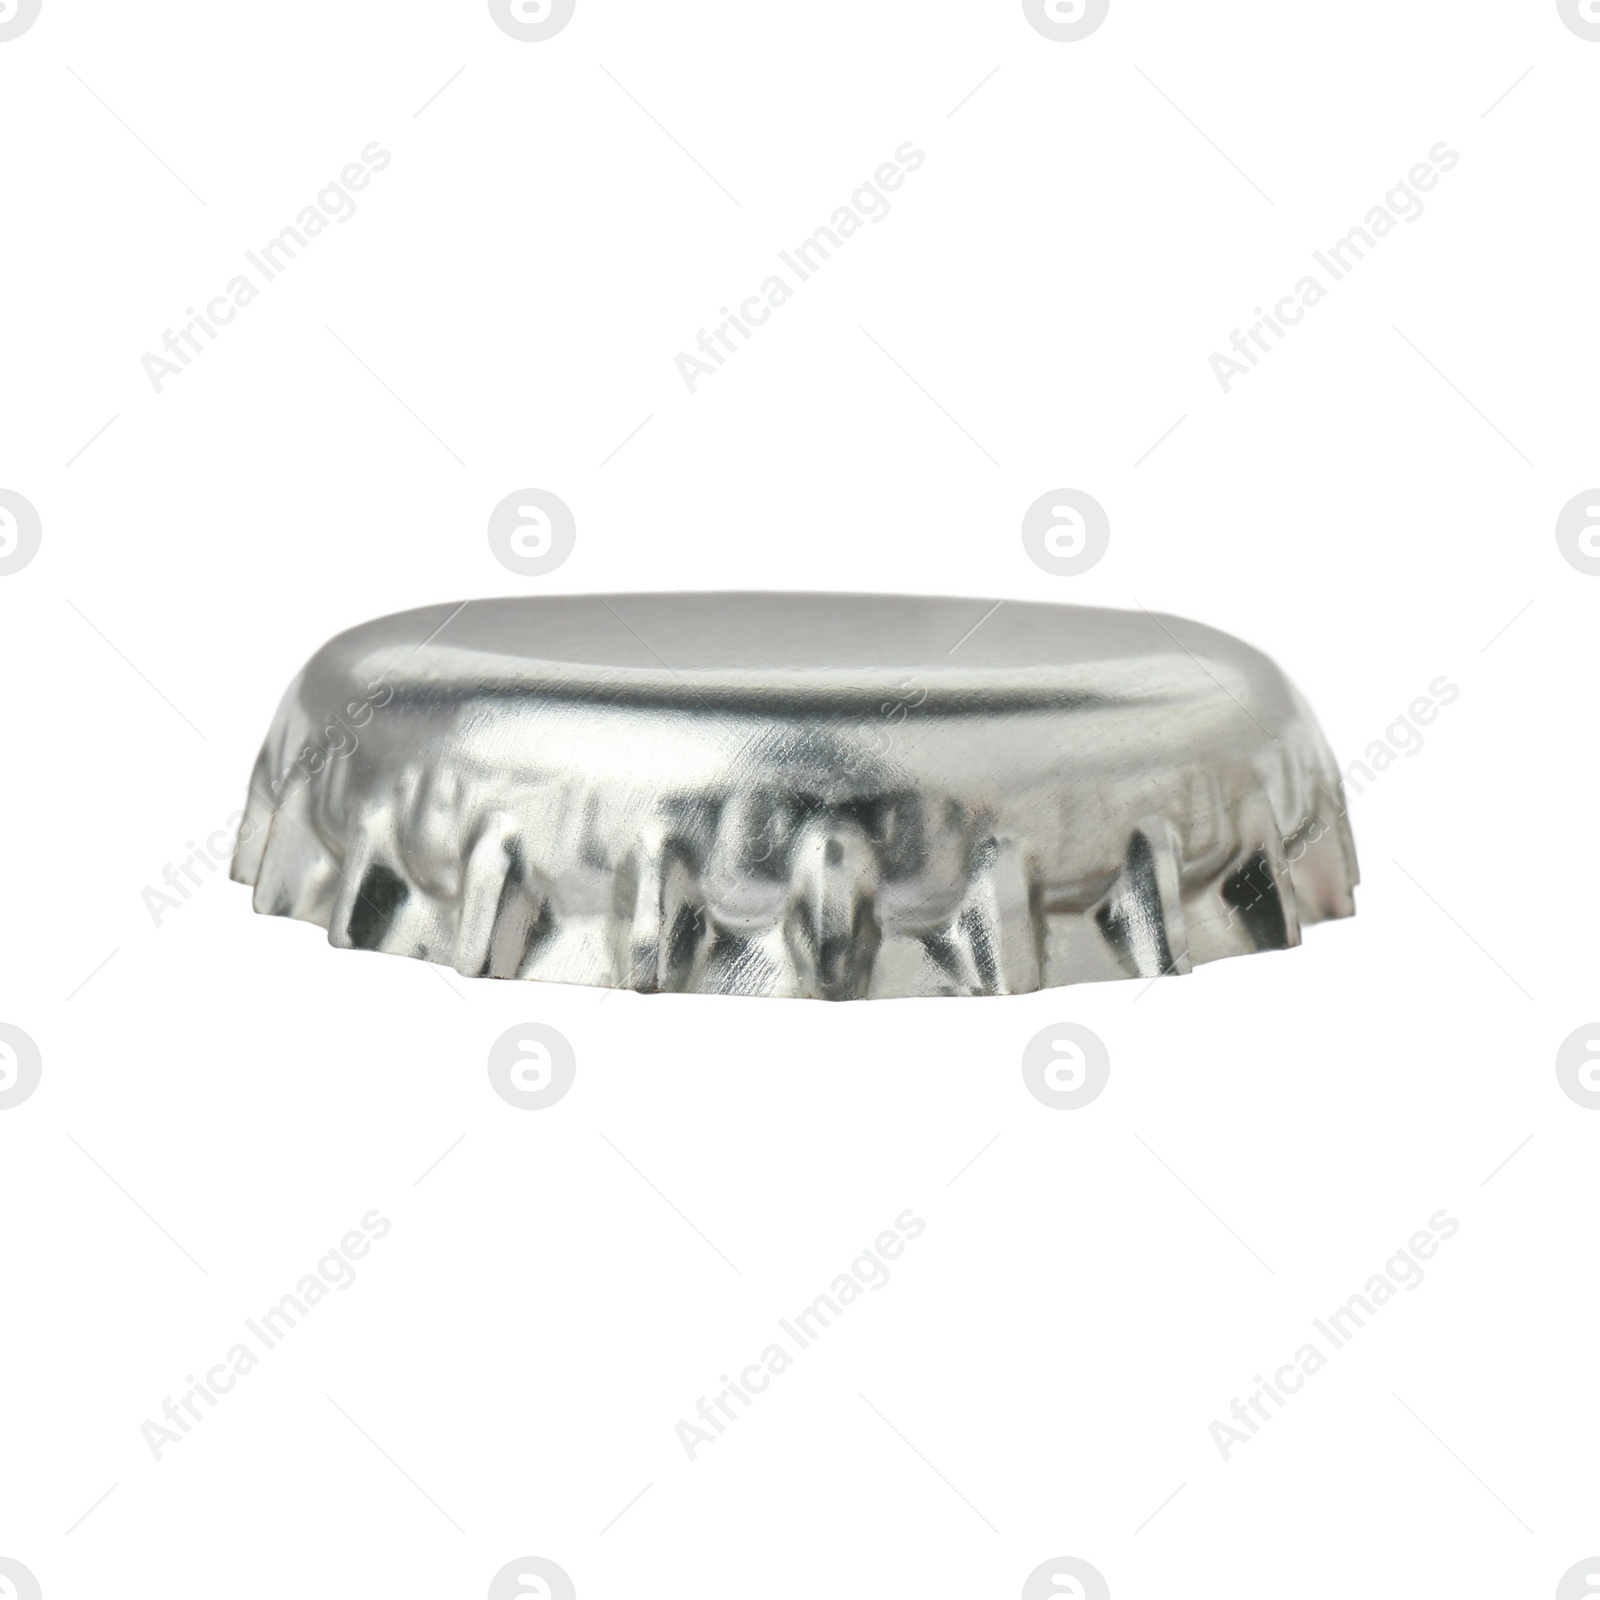 Photo of One silver beer bottle cap isolated on white